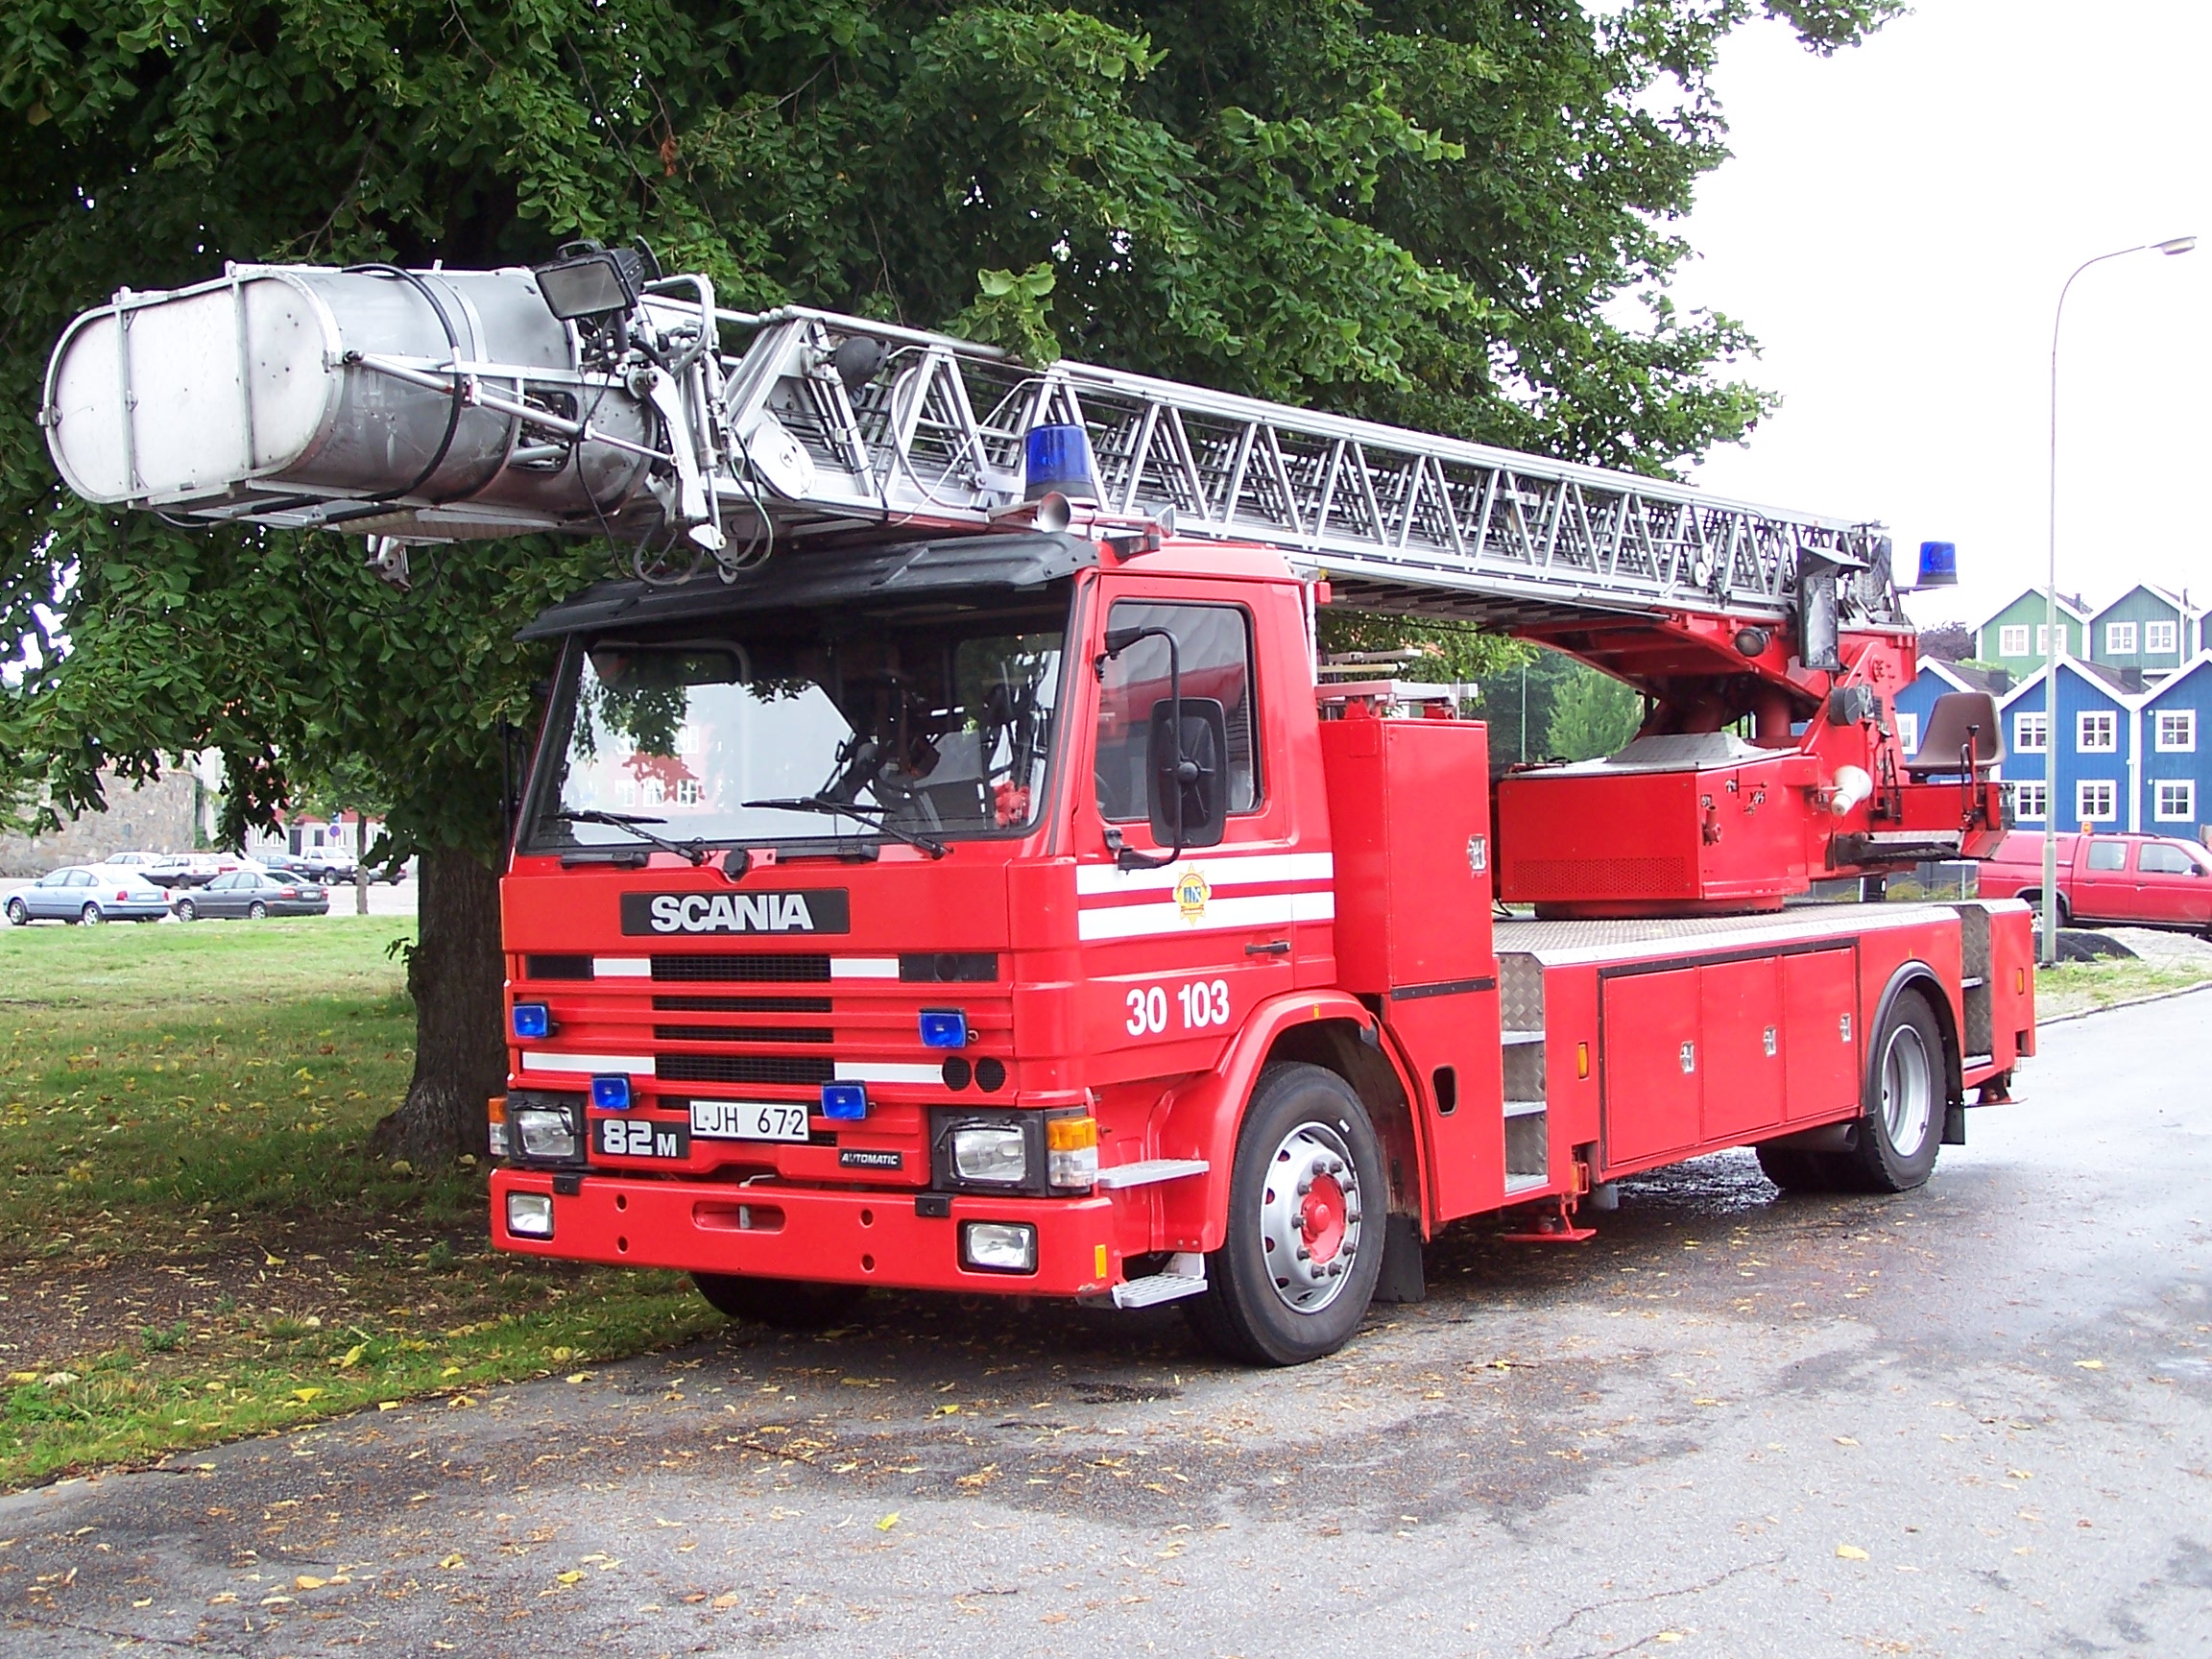 Vehicles Scania Fire Truck HD Wallpaper | Background Image